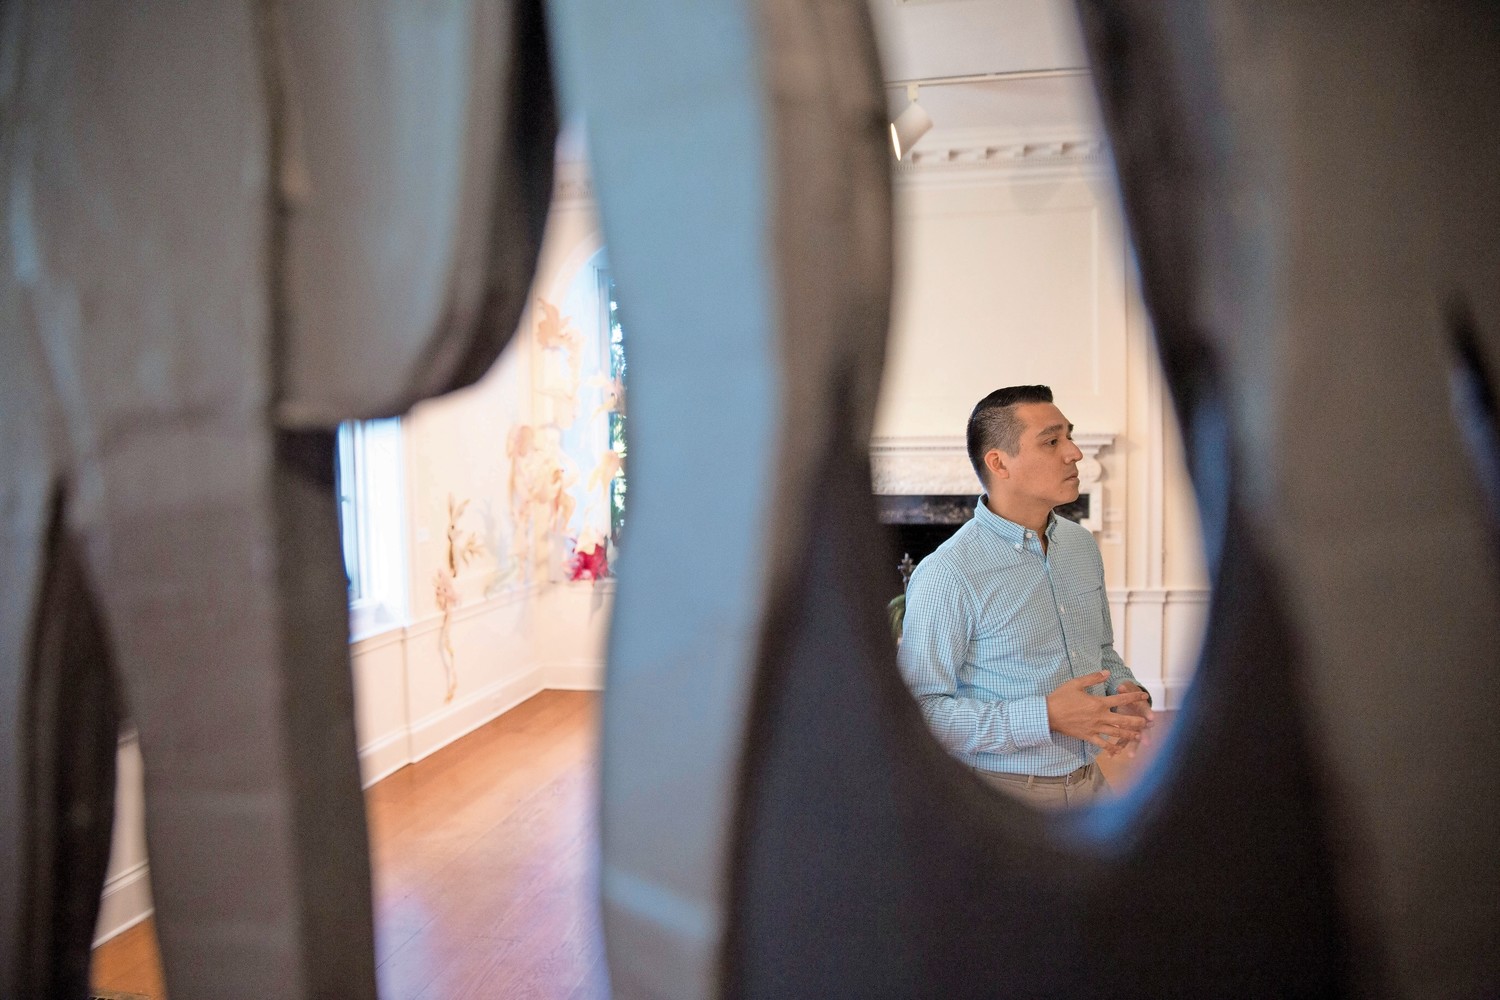 Standing behind an installation by artist Amie Cunat, Gabriel de Guzman — Wave Hill’s Glyndor Gallery curator — talks about garden-related works created by New York artists for the Sunroom Project Space’s 10th anniversary ‘Call & Response’ exhibition. 